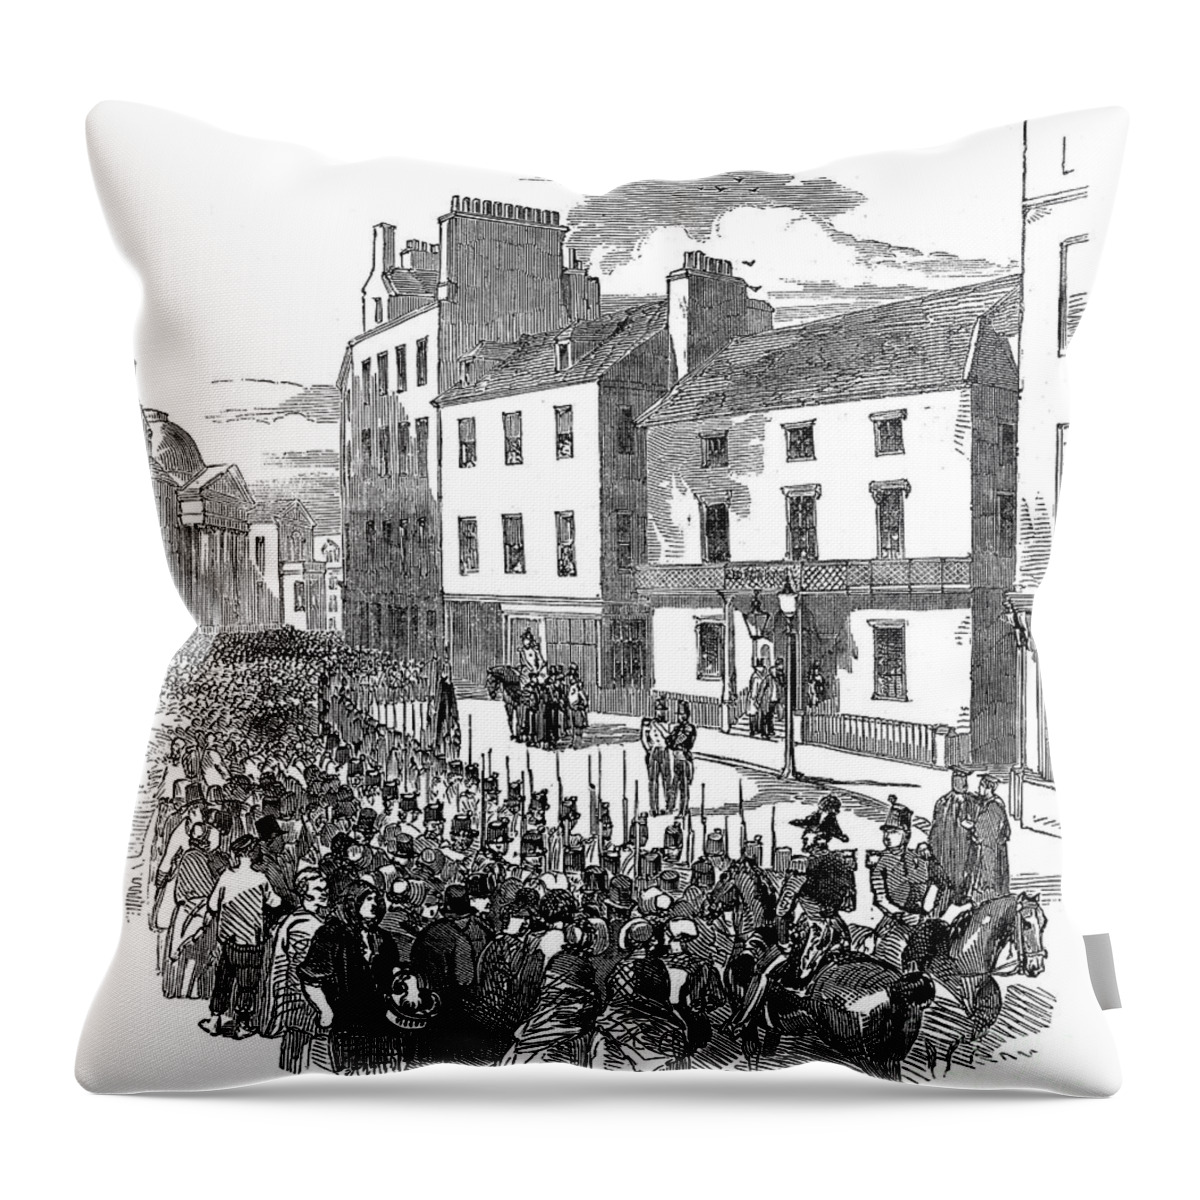 1848 Throw Pillow featuring the photograph Scotland: Perth, 1848 by Granger